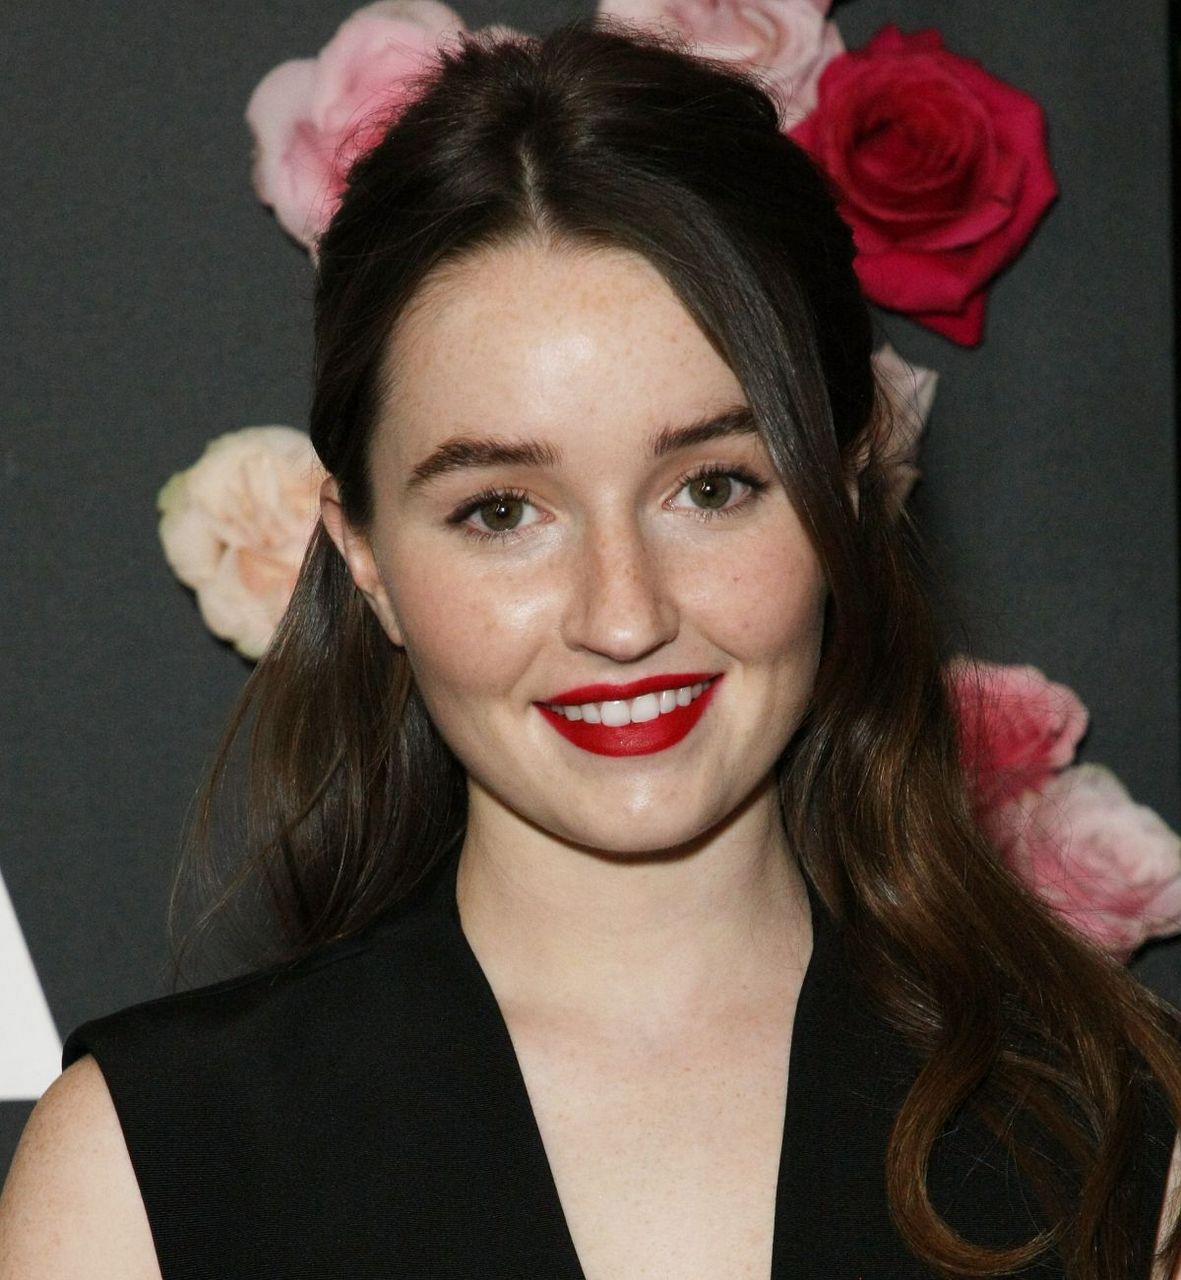 Kaitlyn Dever Vanity Fair And Lancome Celebrate Future Of Hollywood Los Angeles